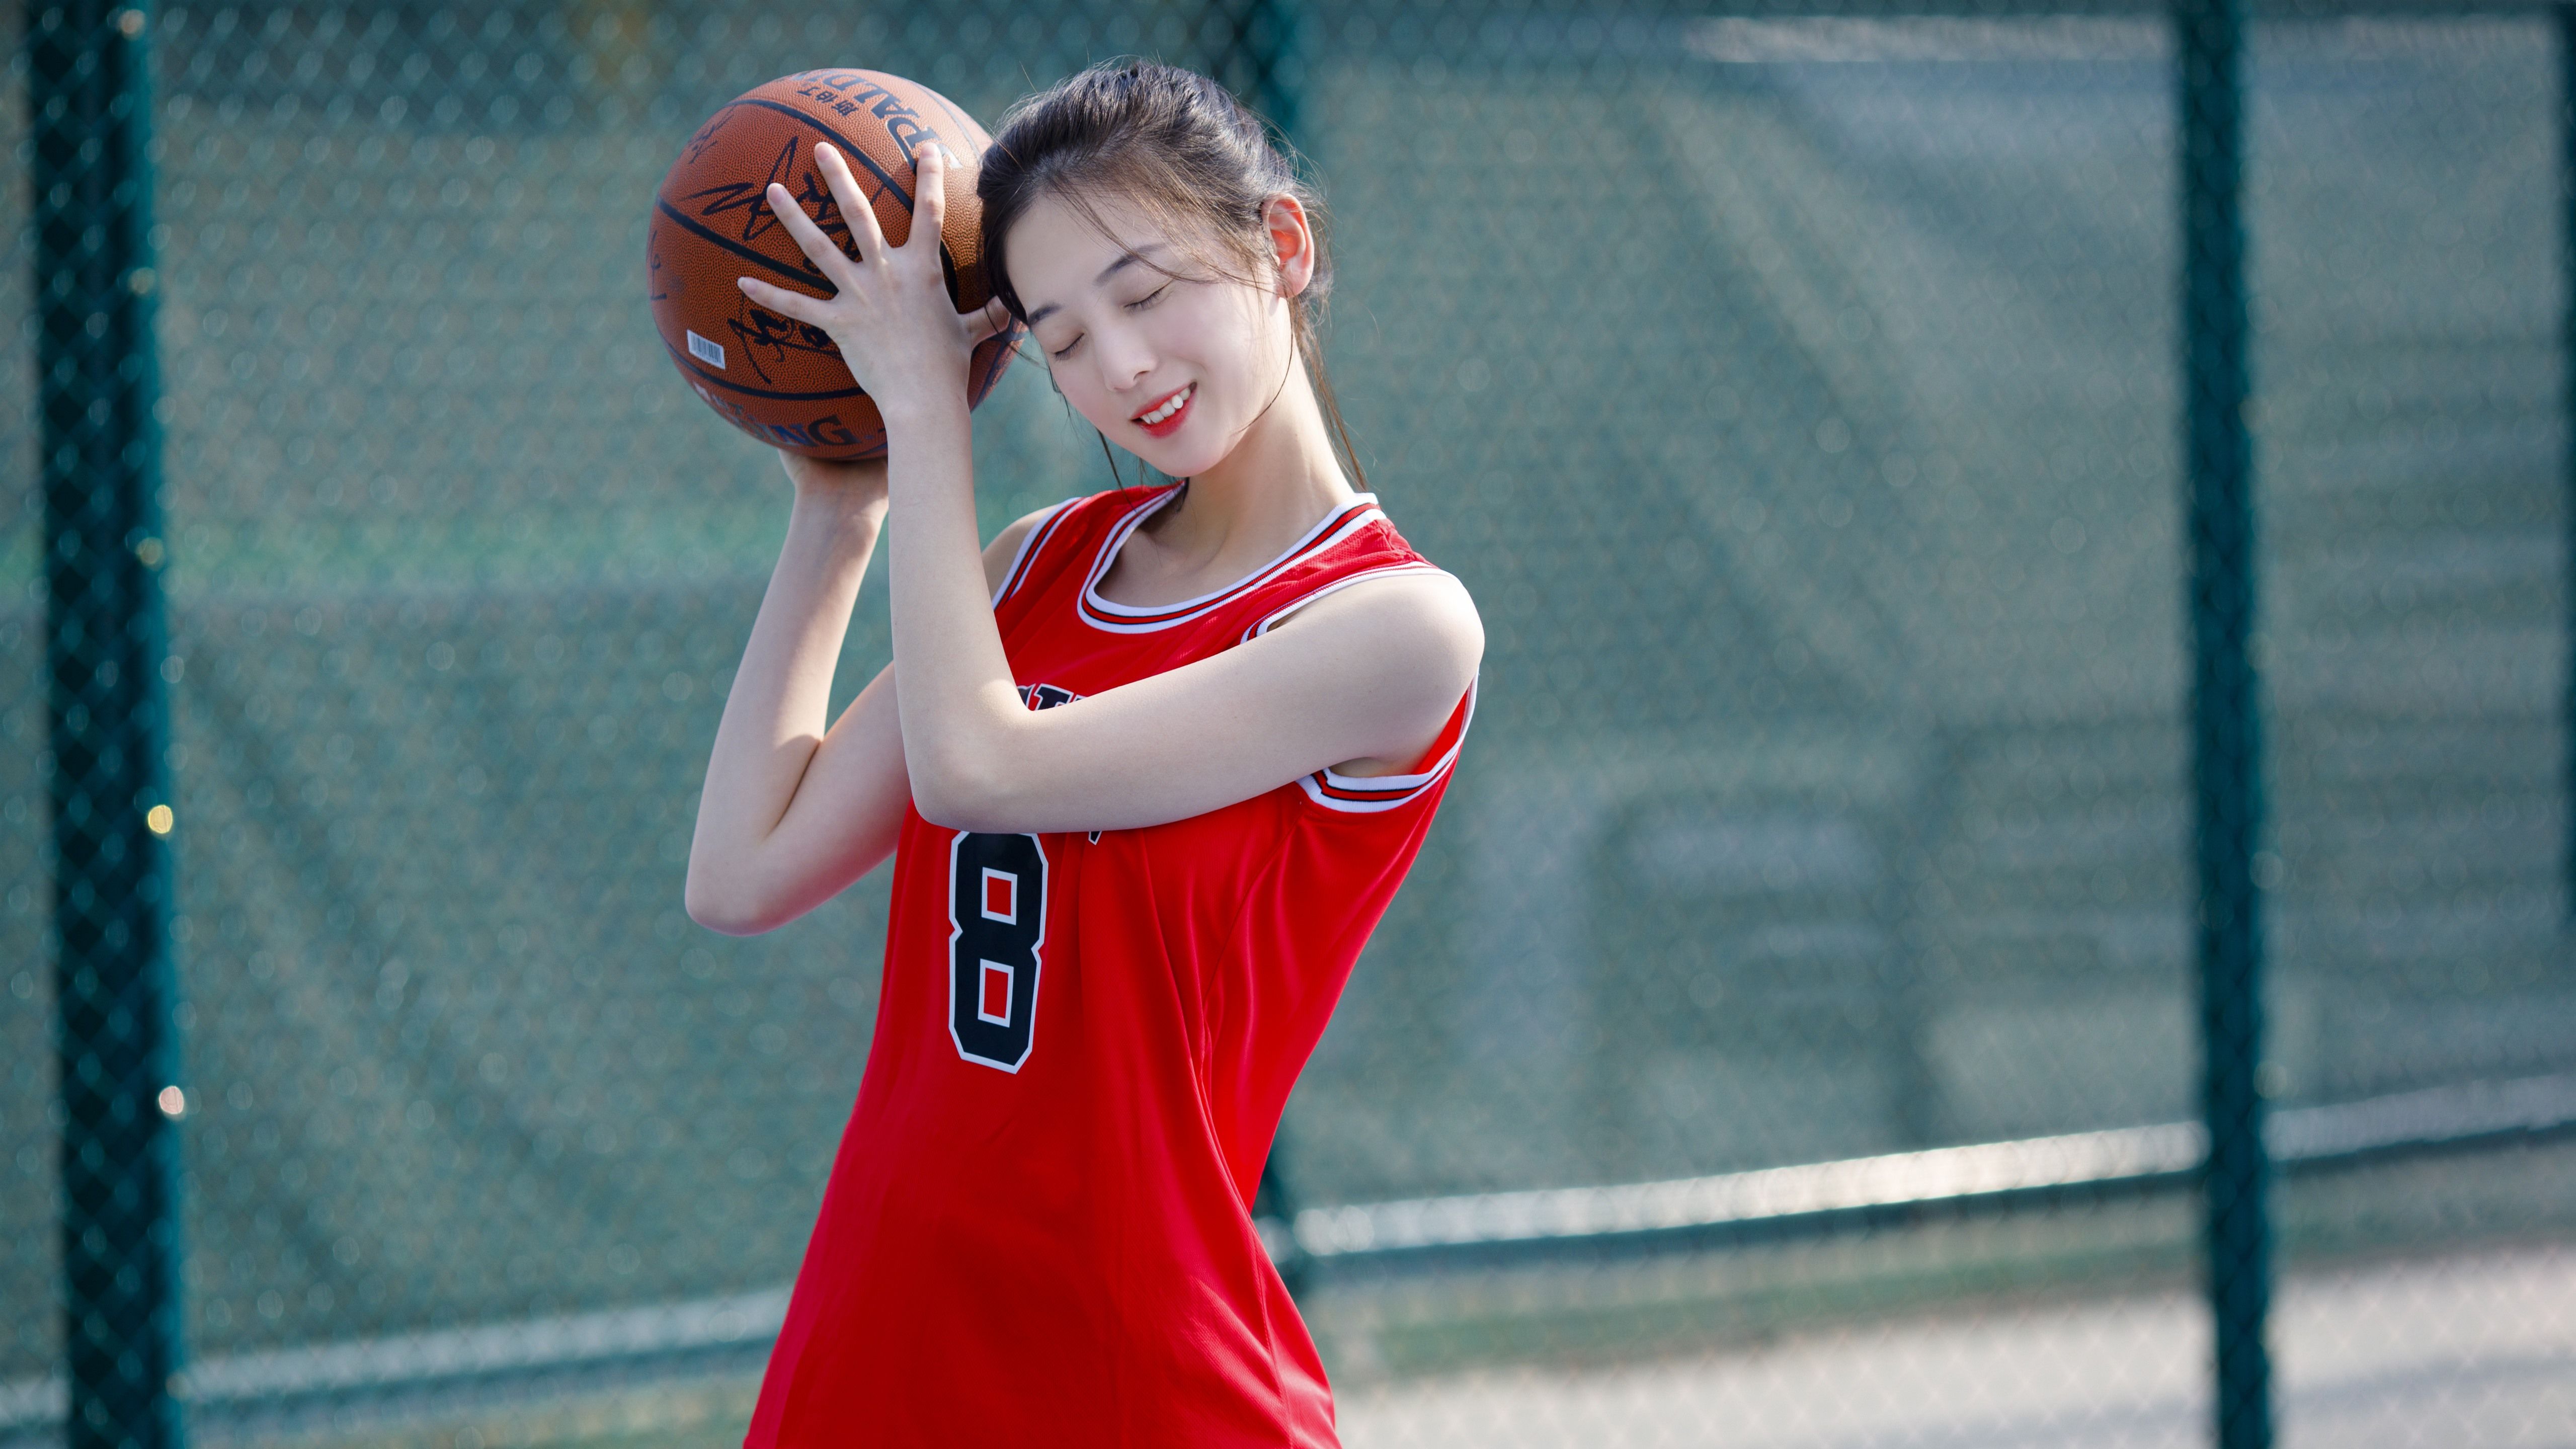 Wallpaper Lovely young girl, basketball, sport 5120x2880 UHD 5K Picture, Image